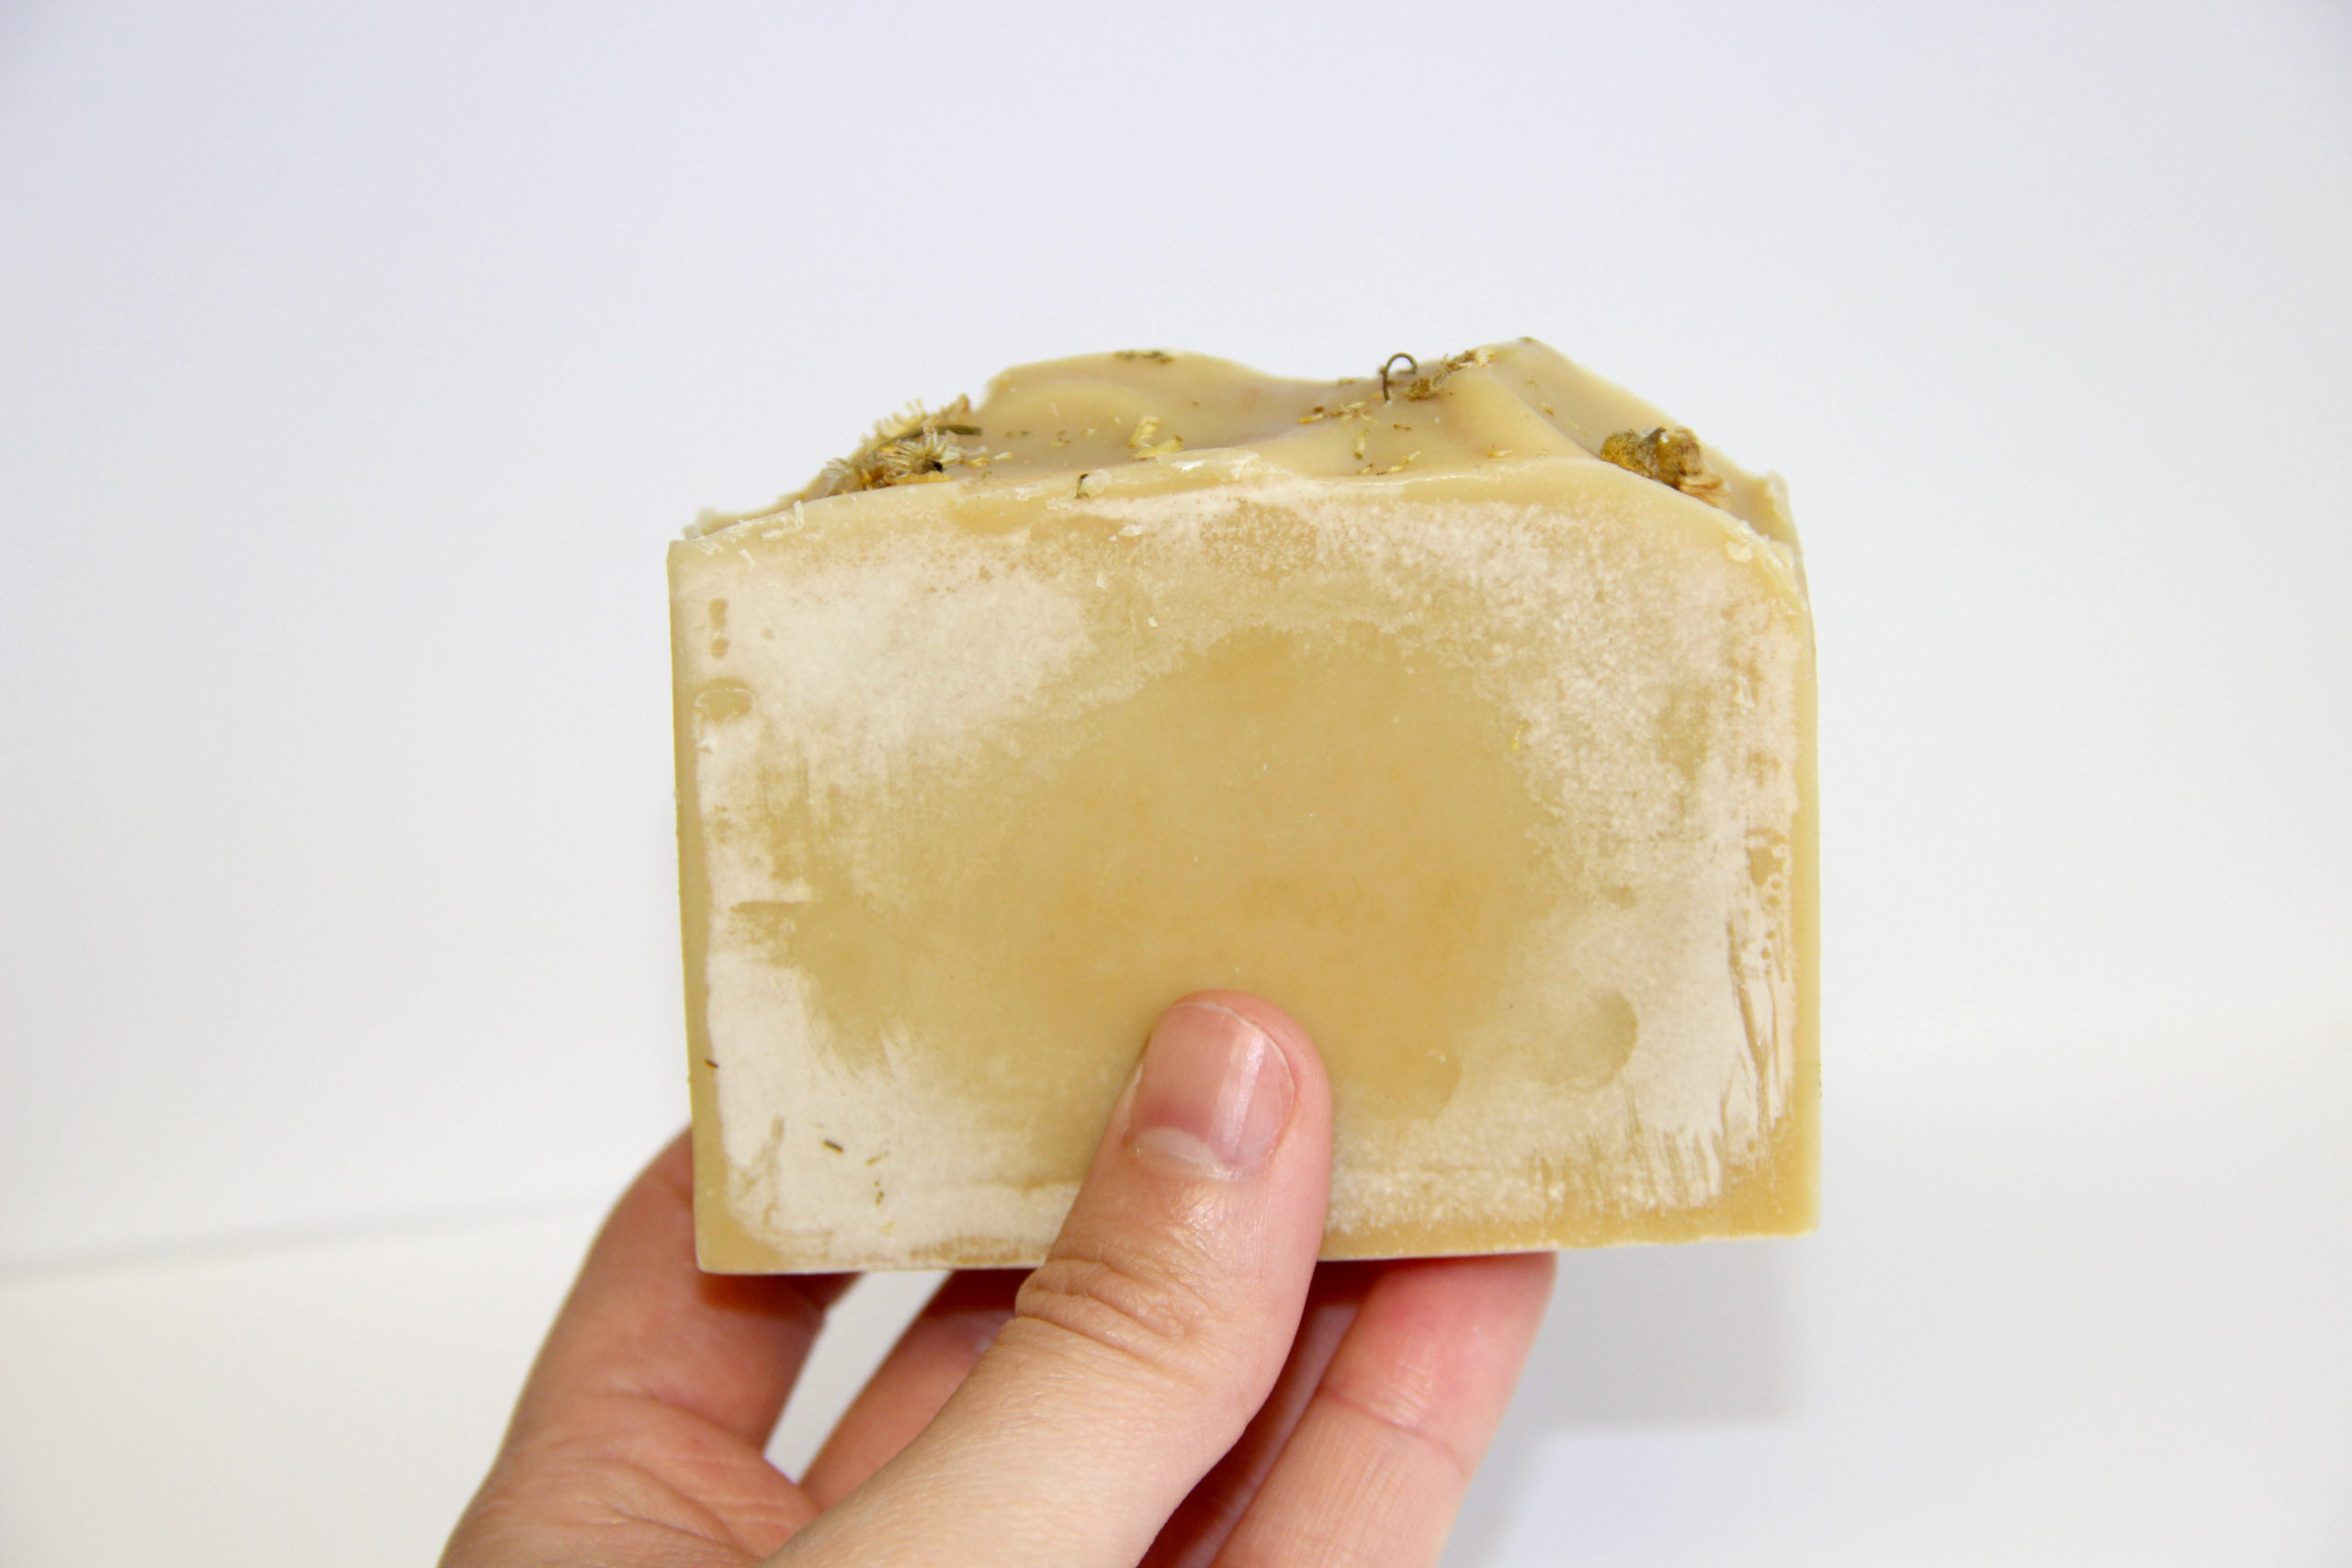 This Is The Key To Preventing Soda Ash On Soap  Cold process soap recipes,  Soap recipes, Soap